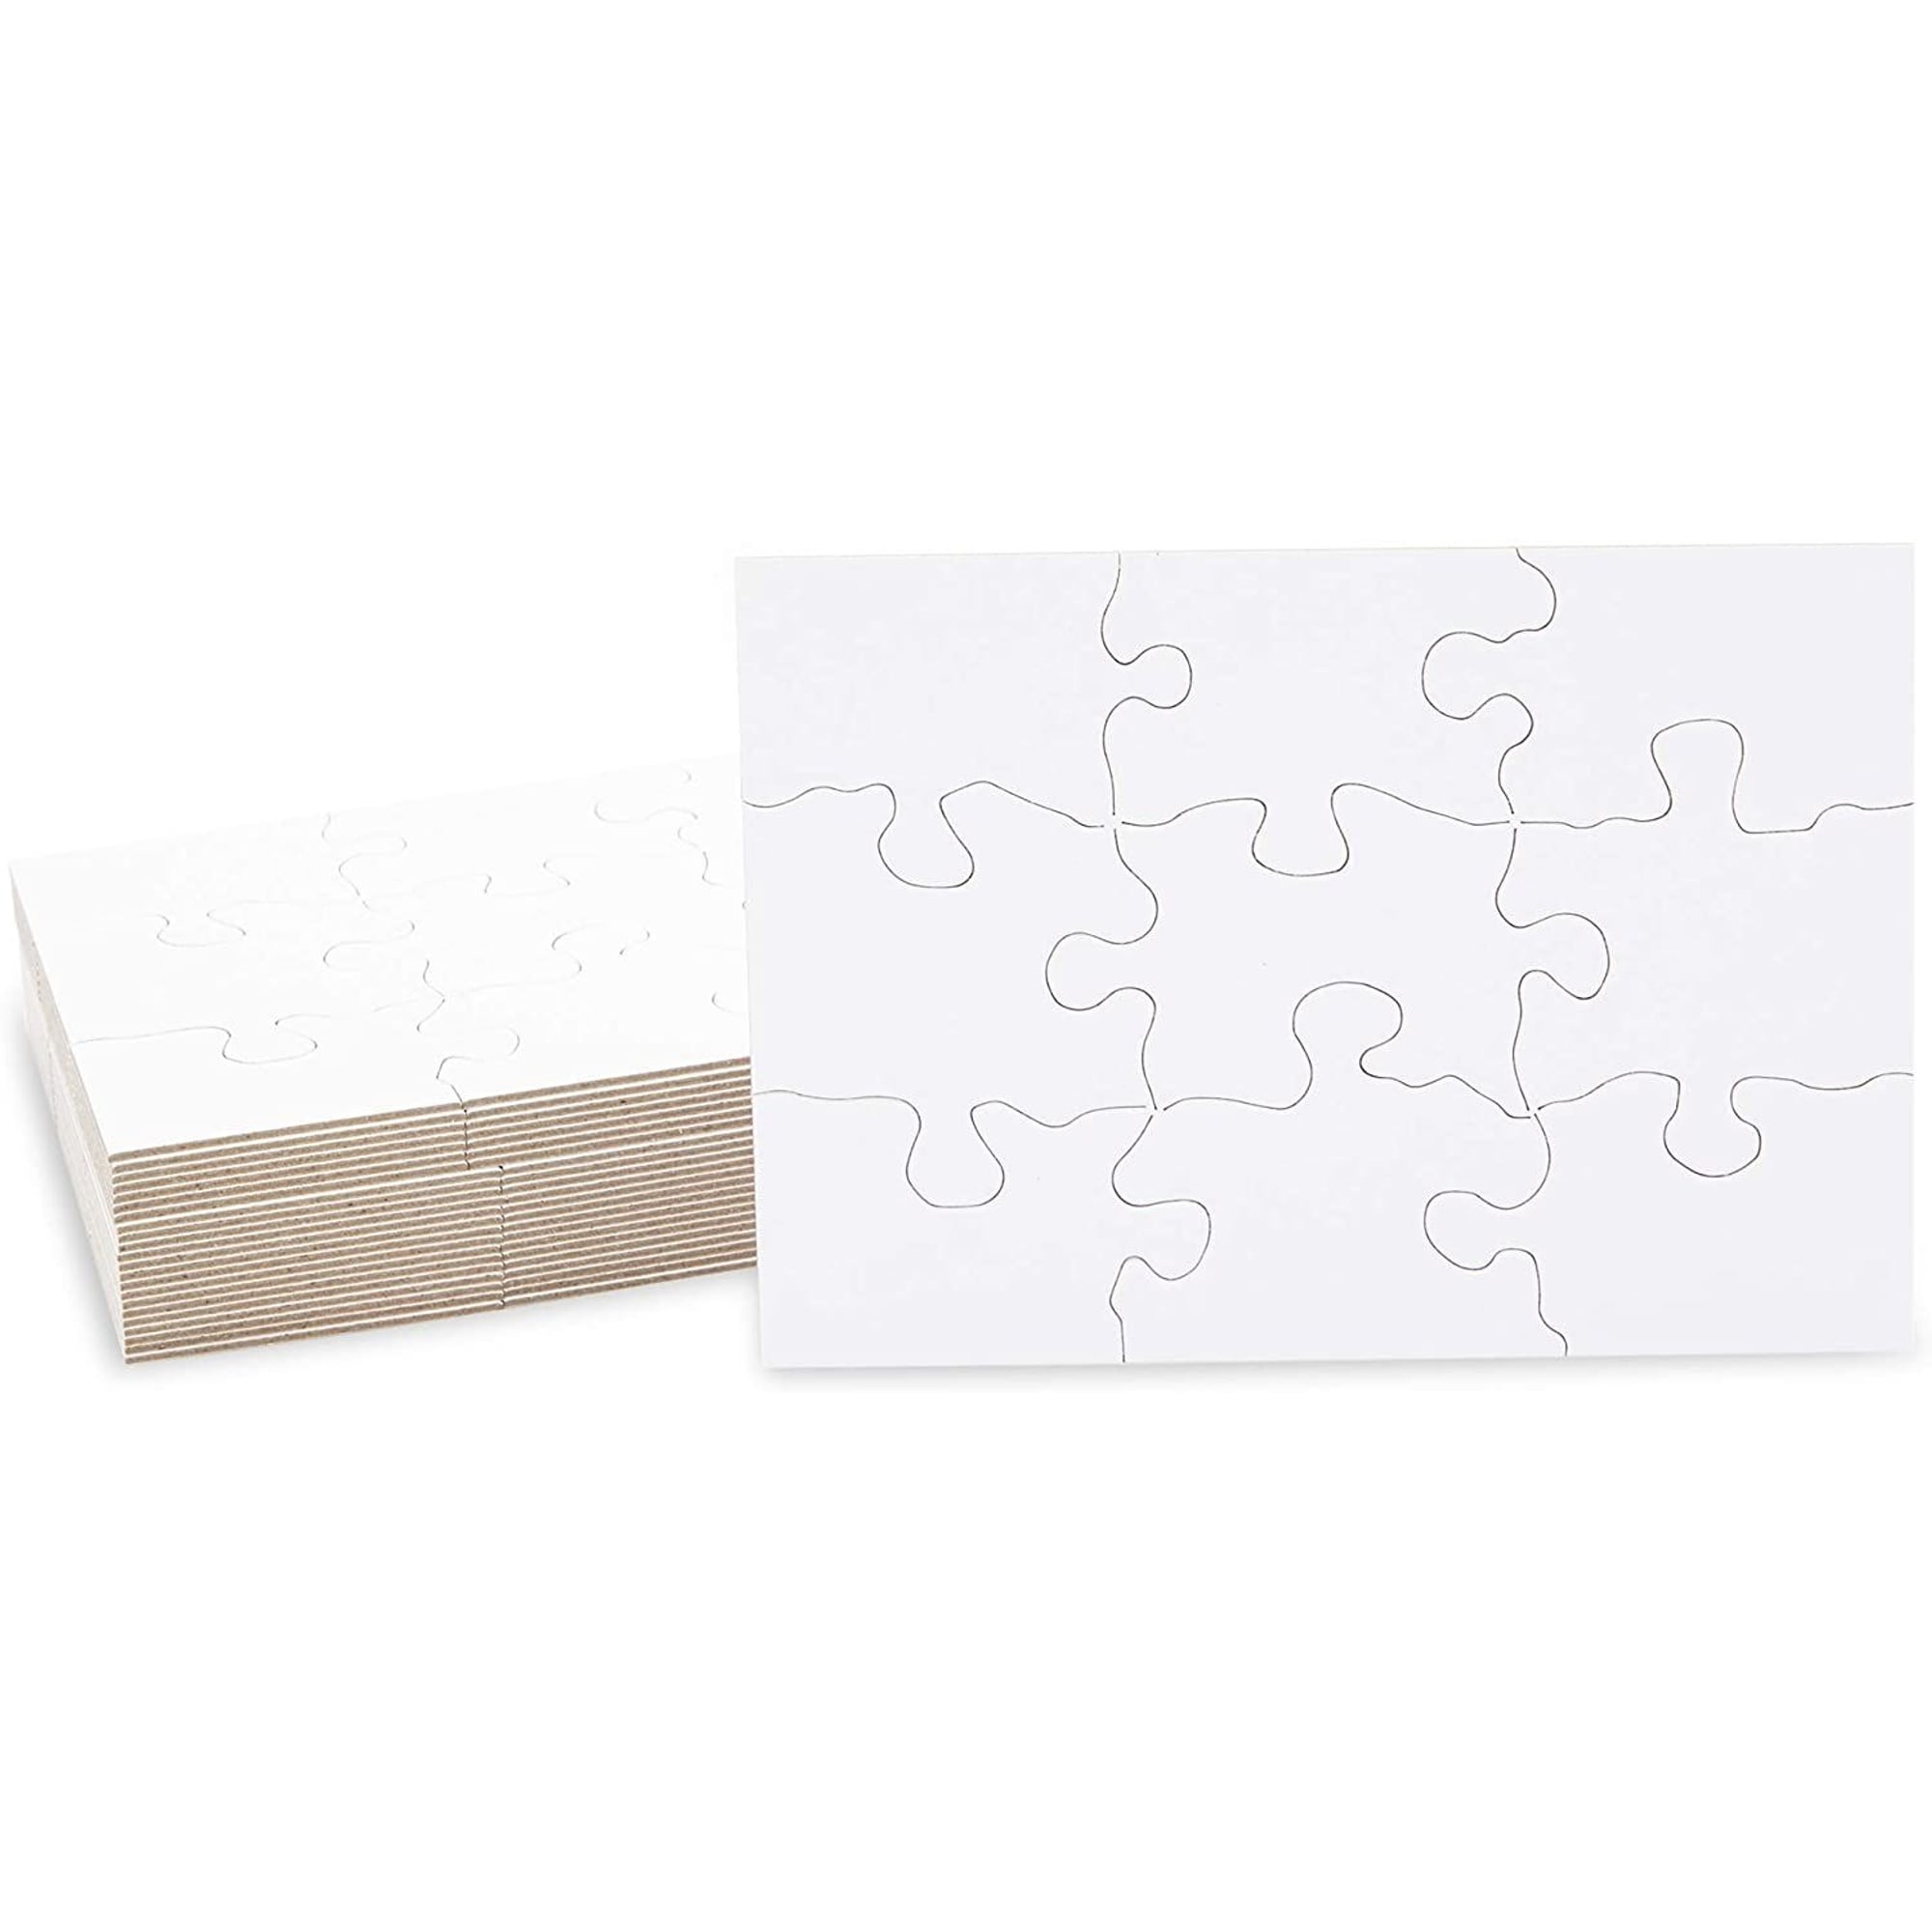 24 Sheets of Blank Puzzles to Draw On with 9 Jigsaw Pieces Each for DIY  Projects, White (5.5 x 4 In) - Bed Bath & Beyond - 37388413